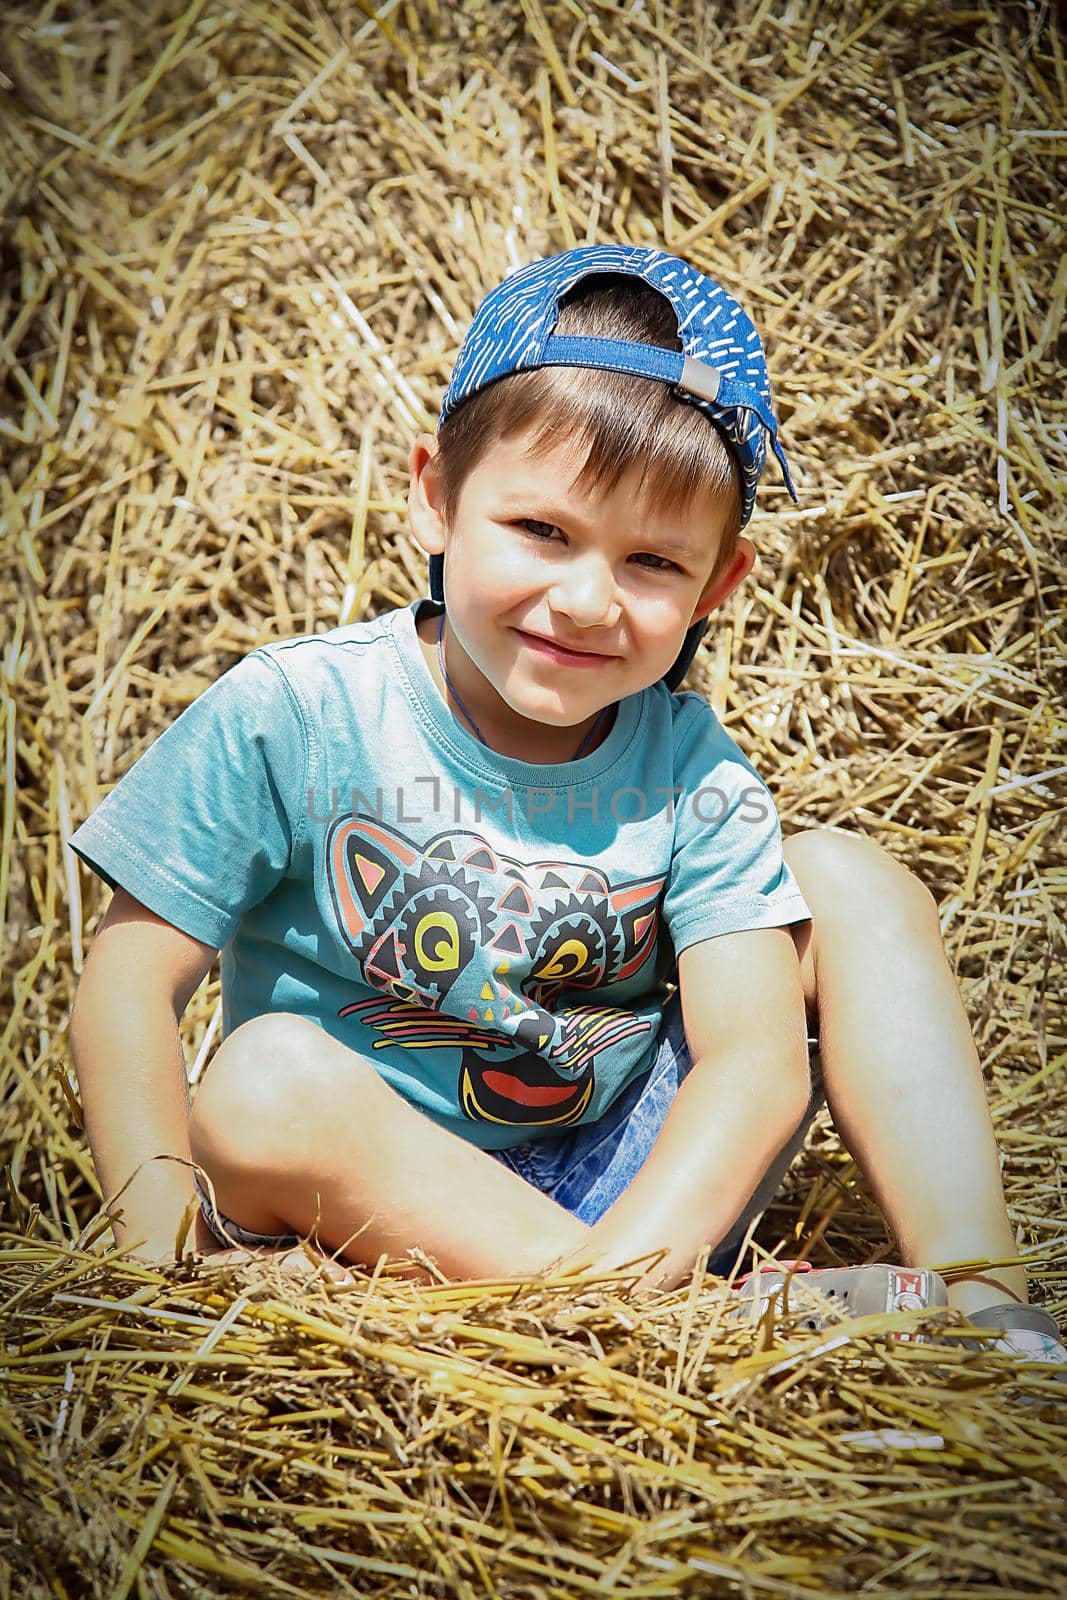 A boy in a blue baseball cap sits on a haystack and smiles on a hot summer day